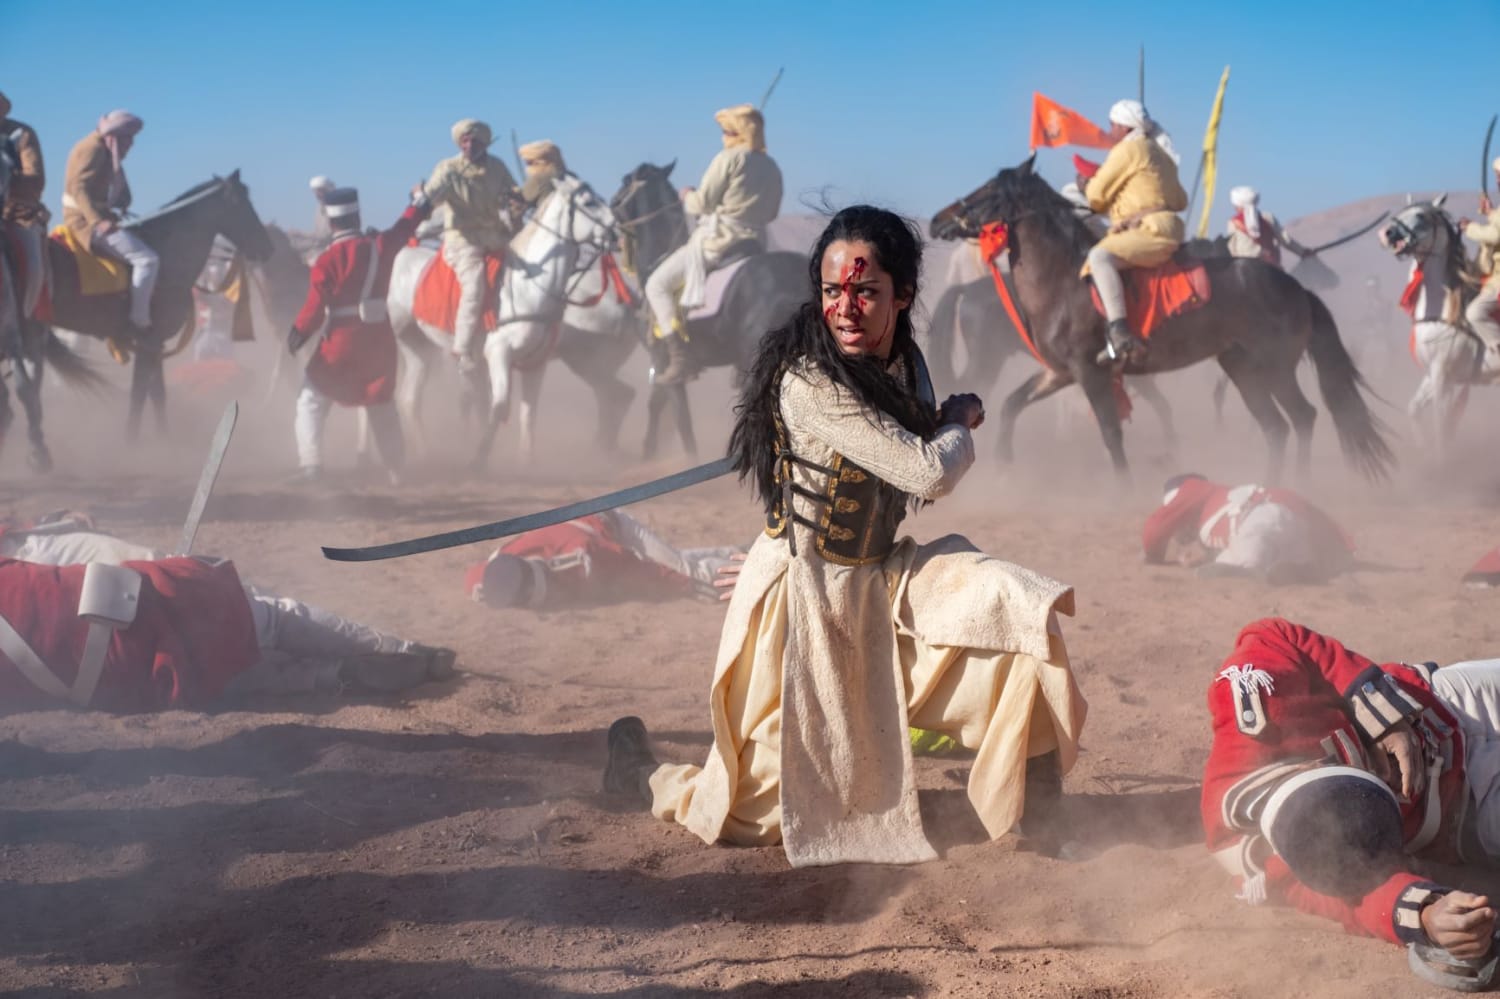 Brave Horse - Warrior Queen of Jhansi' brings a legendary Indian royal to the big screen